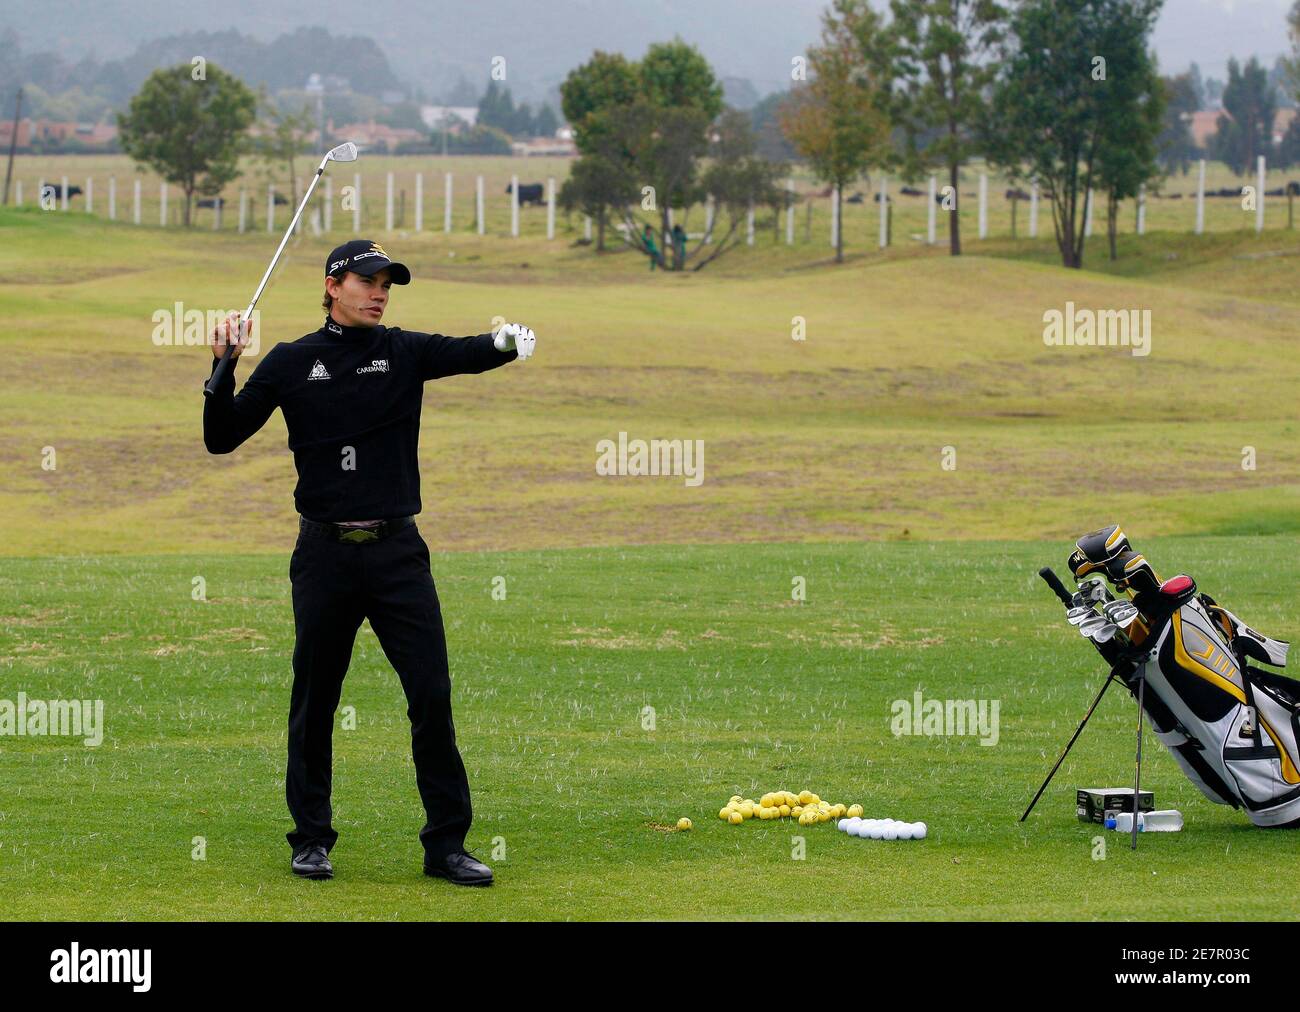 Colombia's golfer Camilo Villegas speaks to the public during a golf clinic  at Guaymaral golf club in Bogota October 14, 2009. REUTERS/Jose Miguel  Gomez (COLOMBIA SPORT GOLF Stock Photo - Alamy